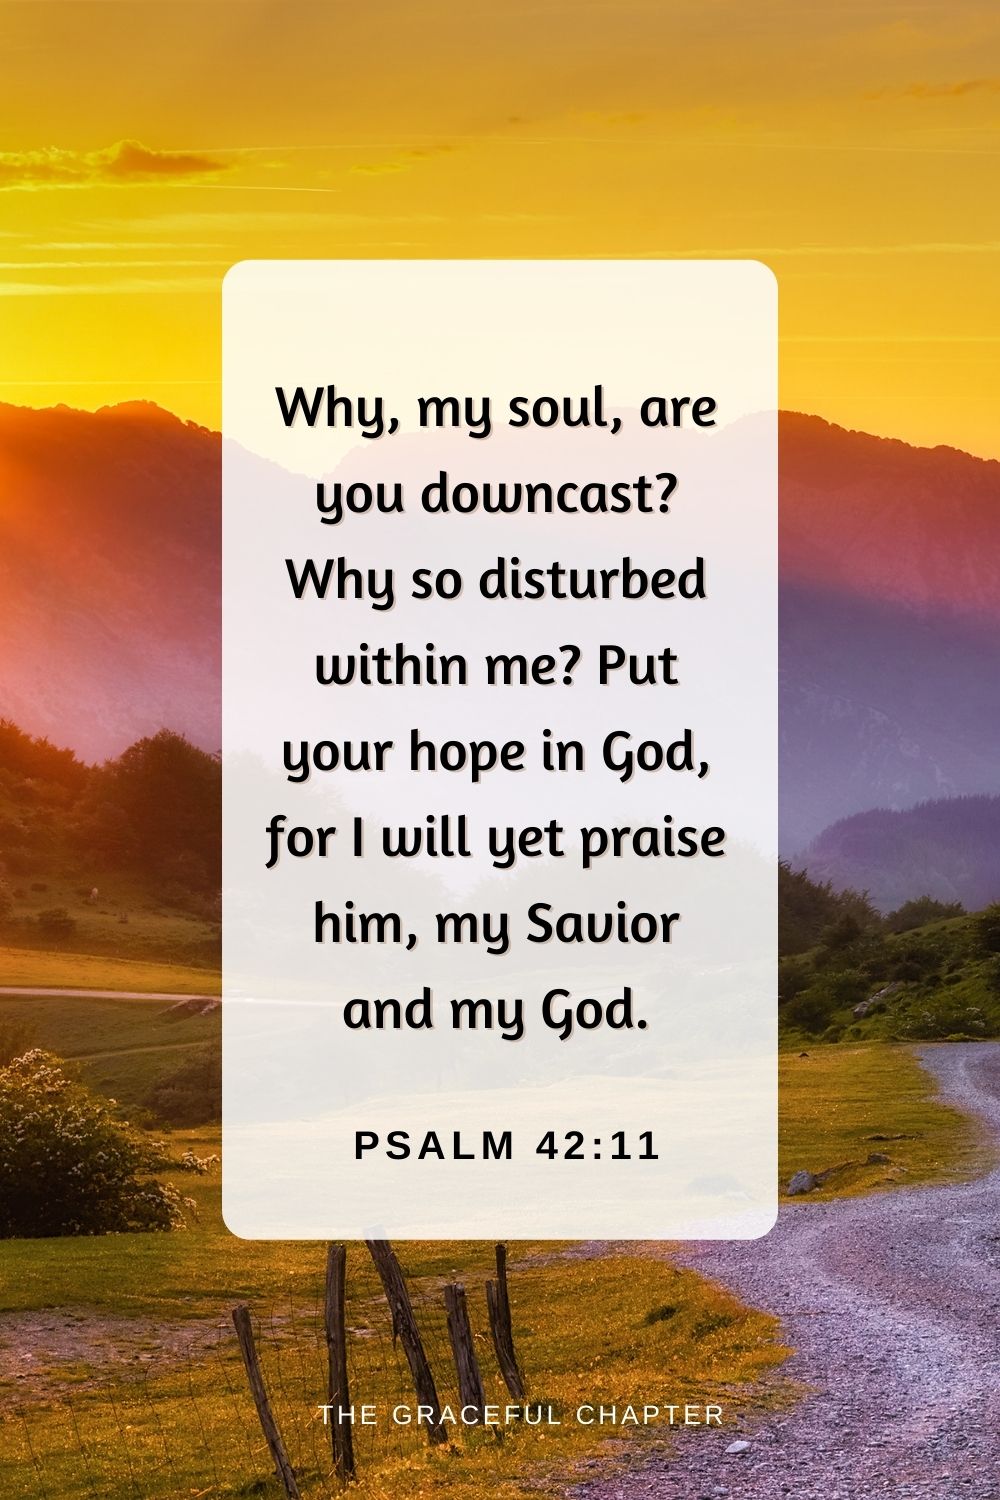 Why, my soul, are you downcast? Why so disturbed within me? Put your hope in God, for I will yet praise him, my Savior and my God.